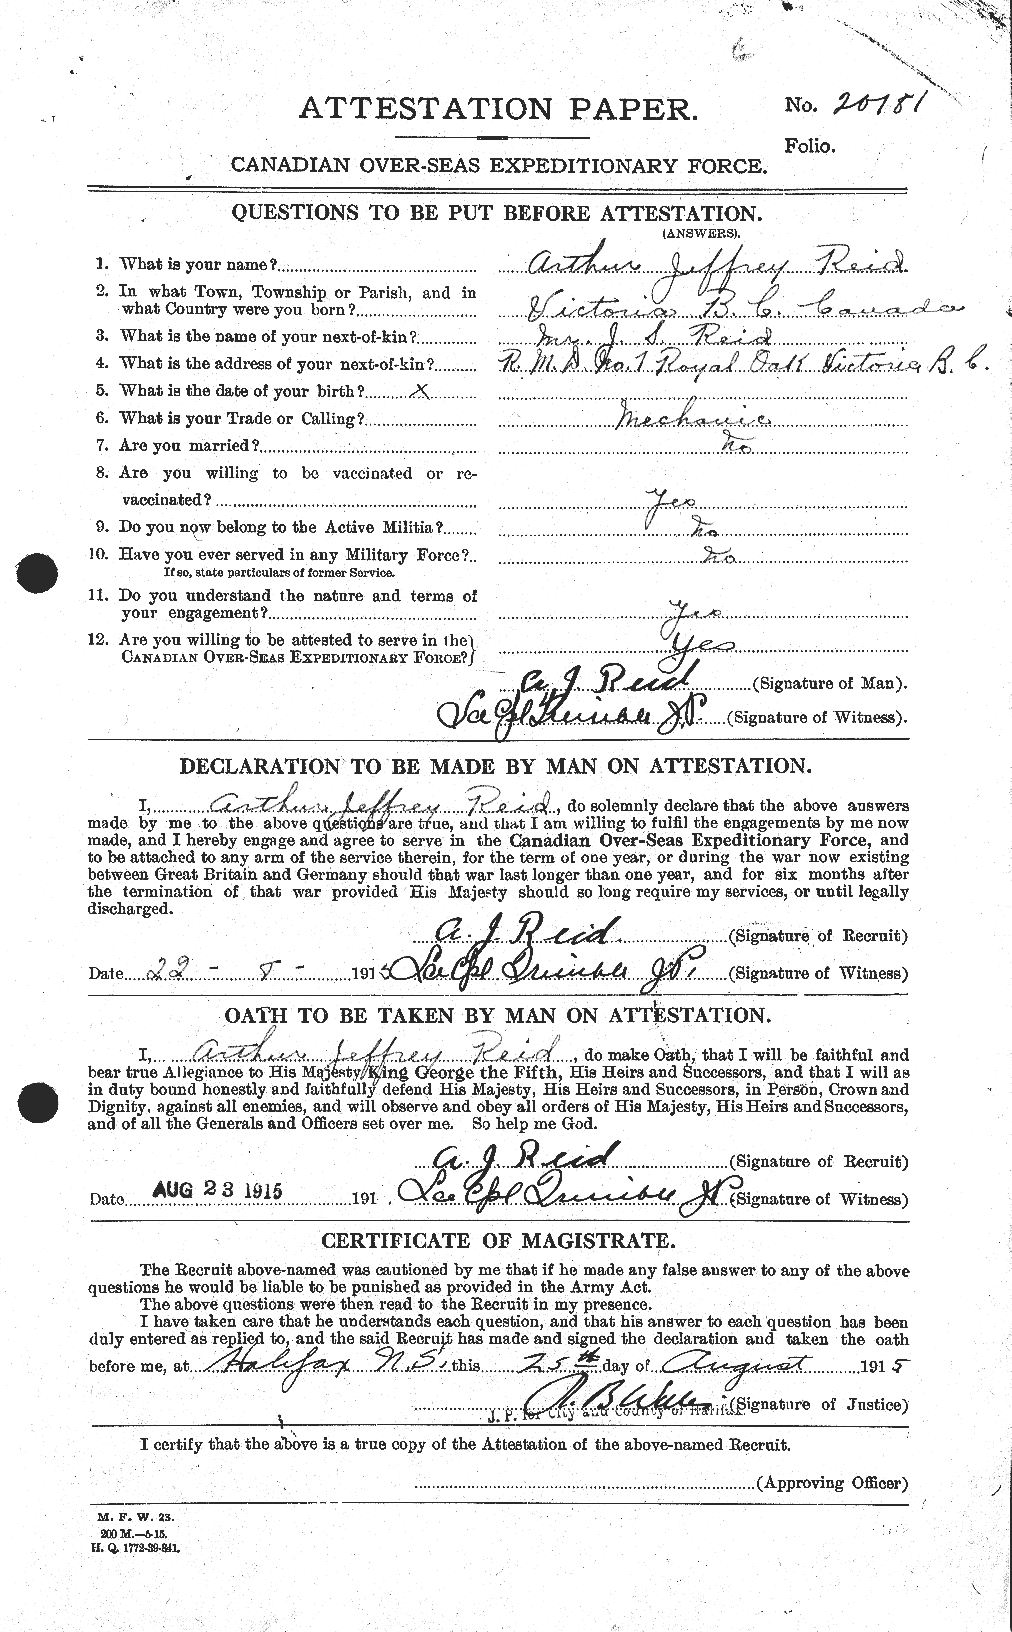 Personnel Records of the First World War - CEF 597842a